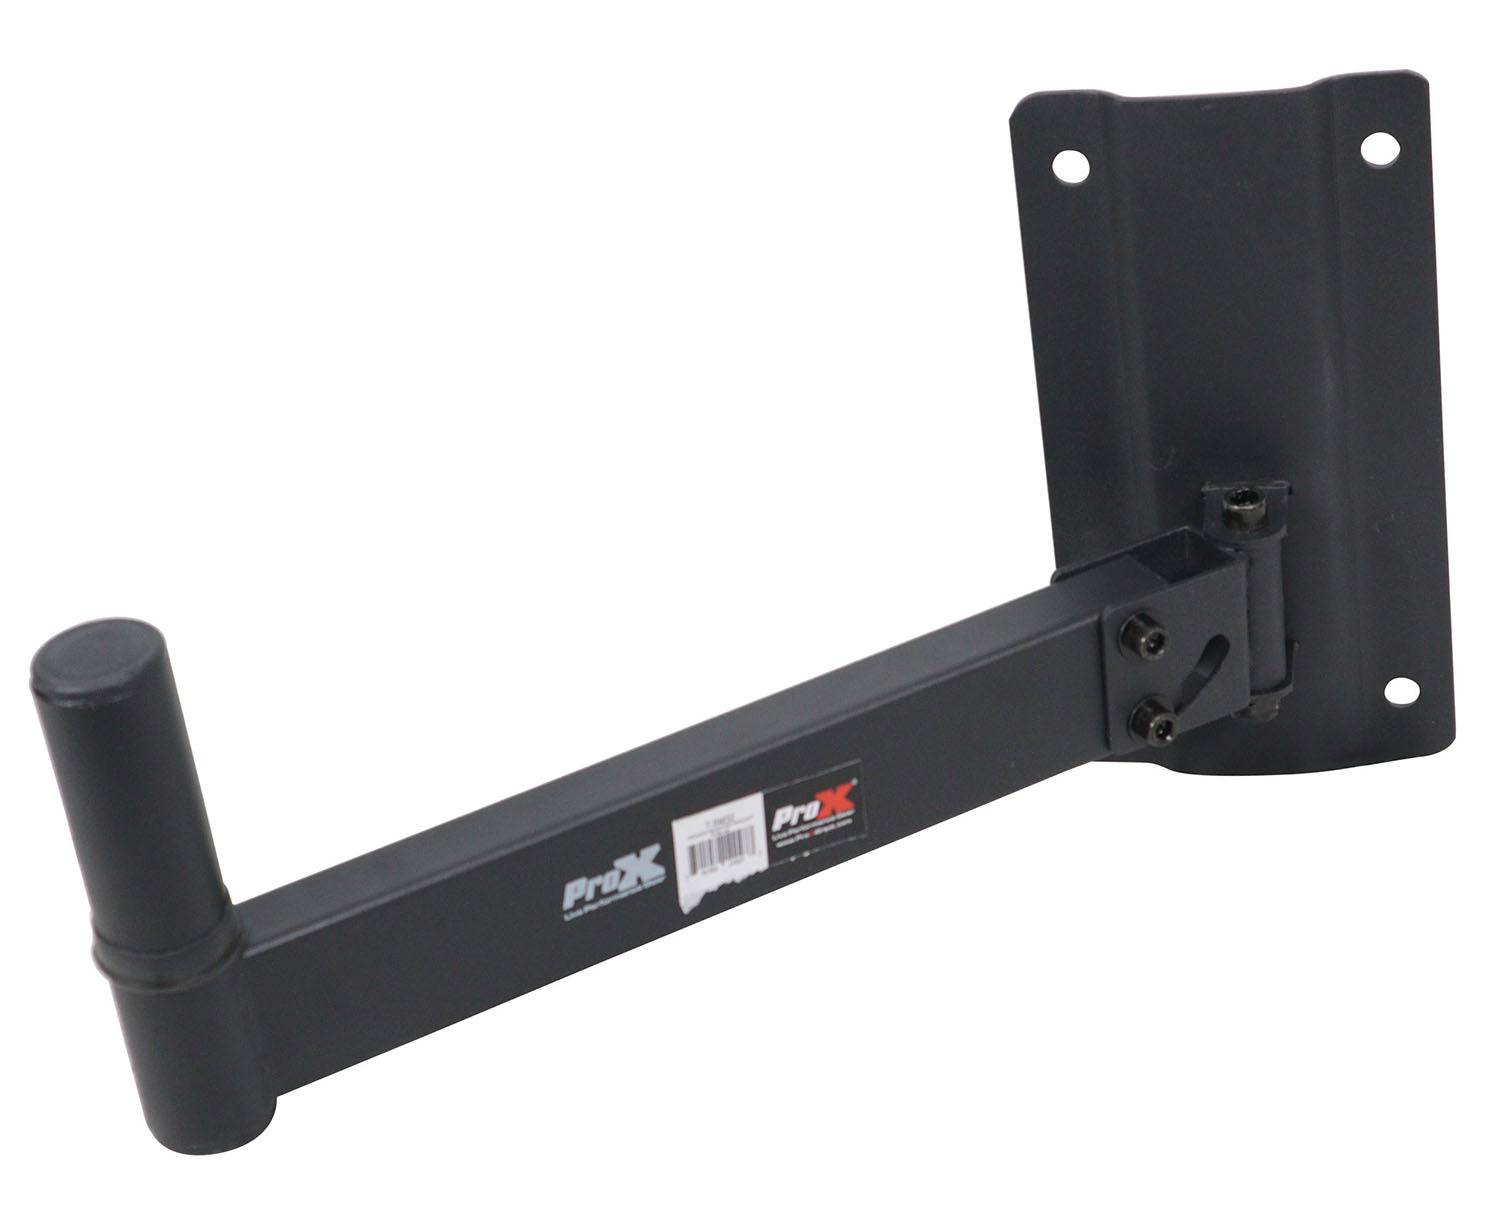 ProX T-SM32 Wall Mount Hinged Bracket for PA Speaker Installations - Black Finish - Hollywood DJ